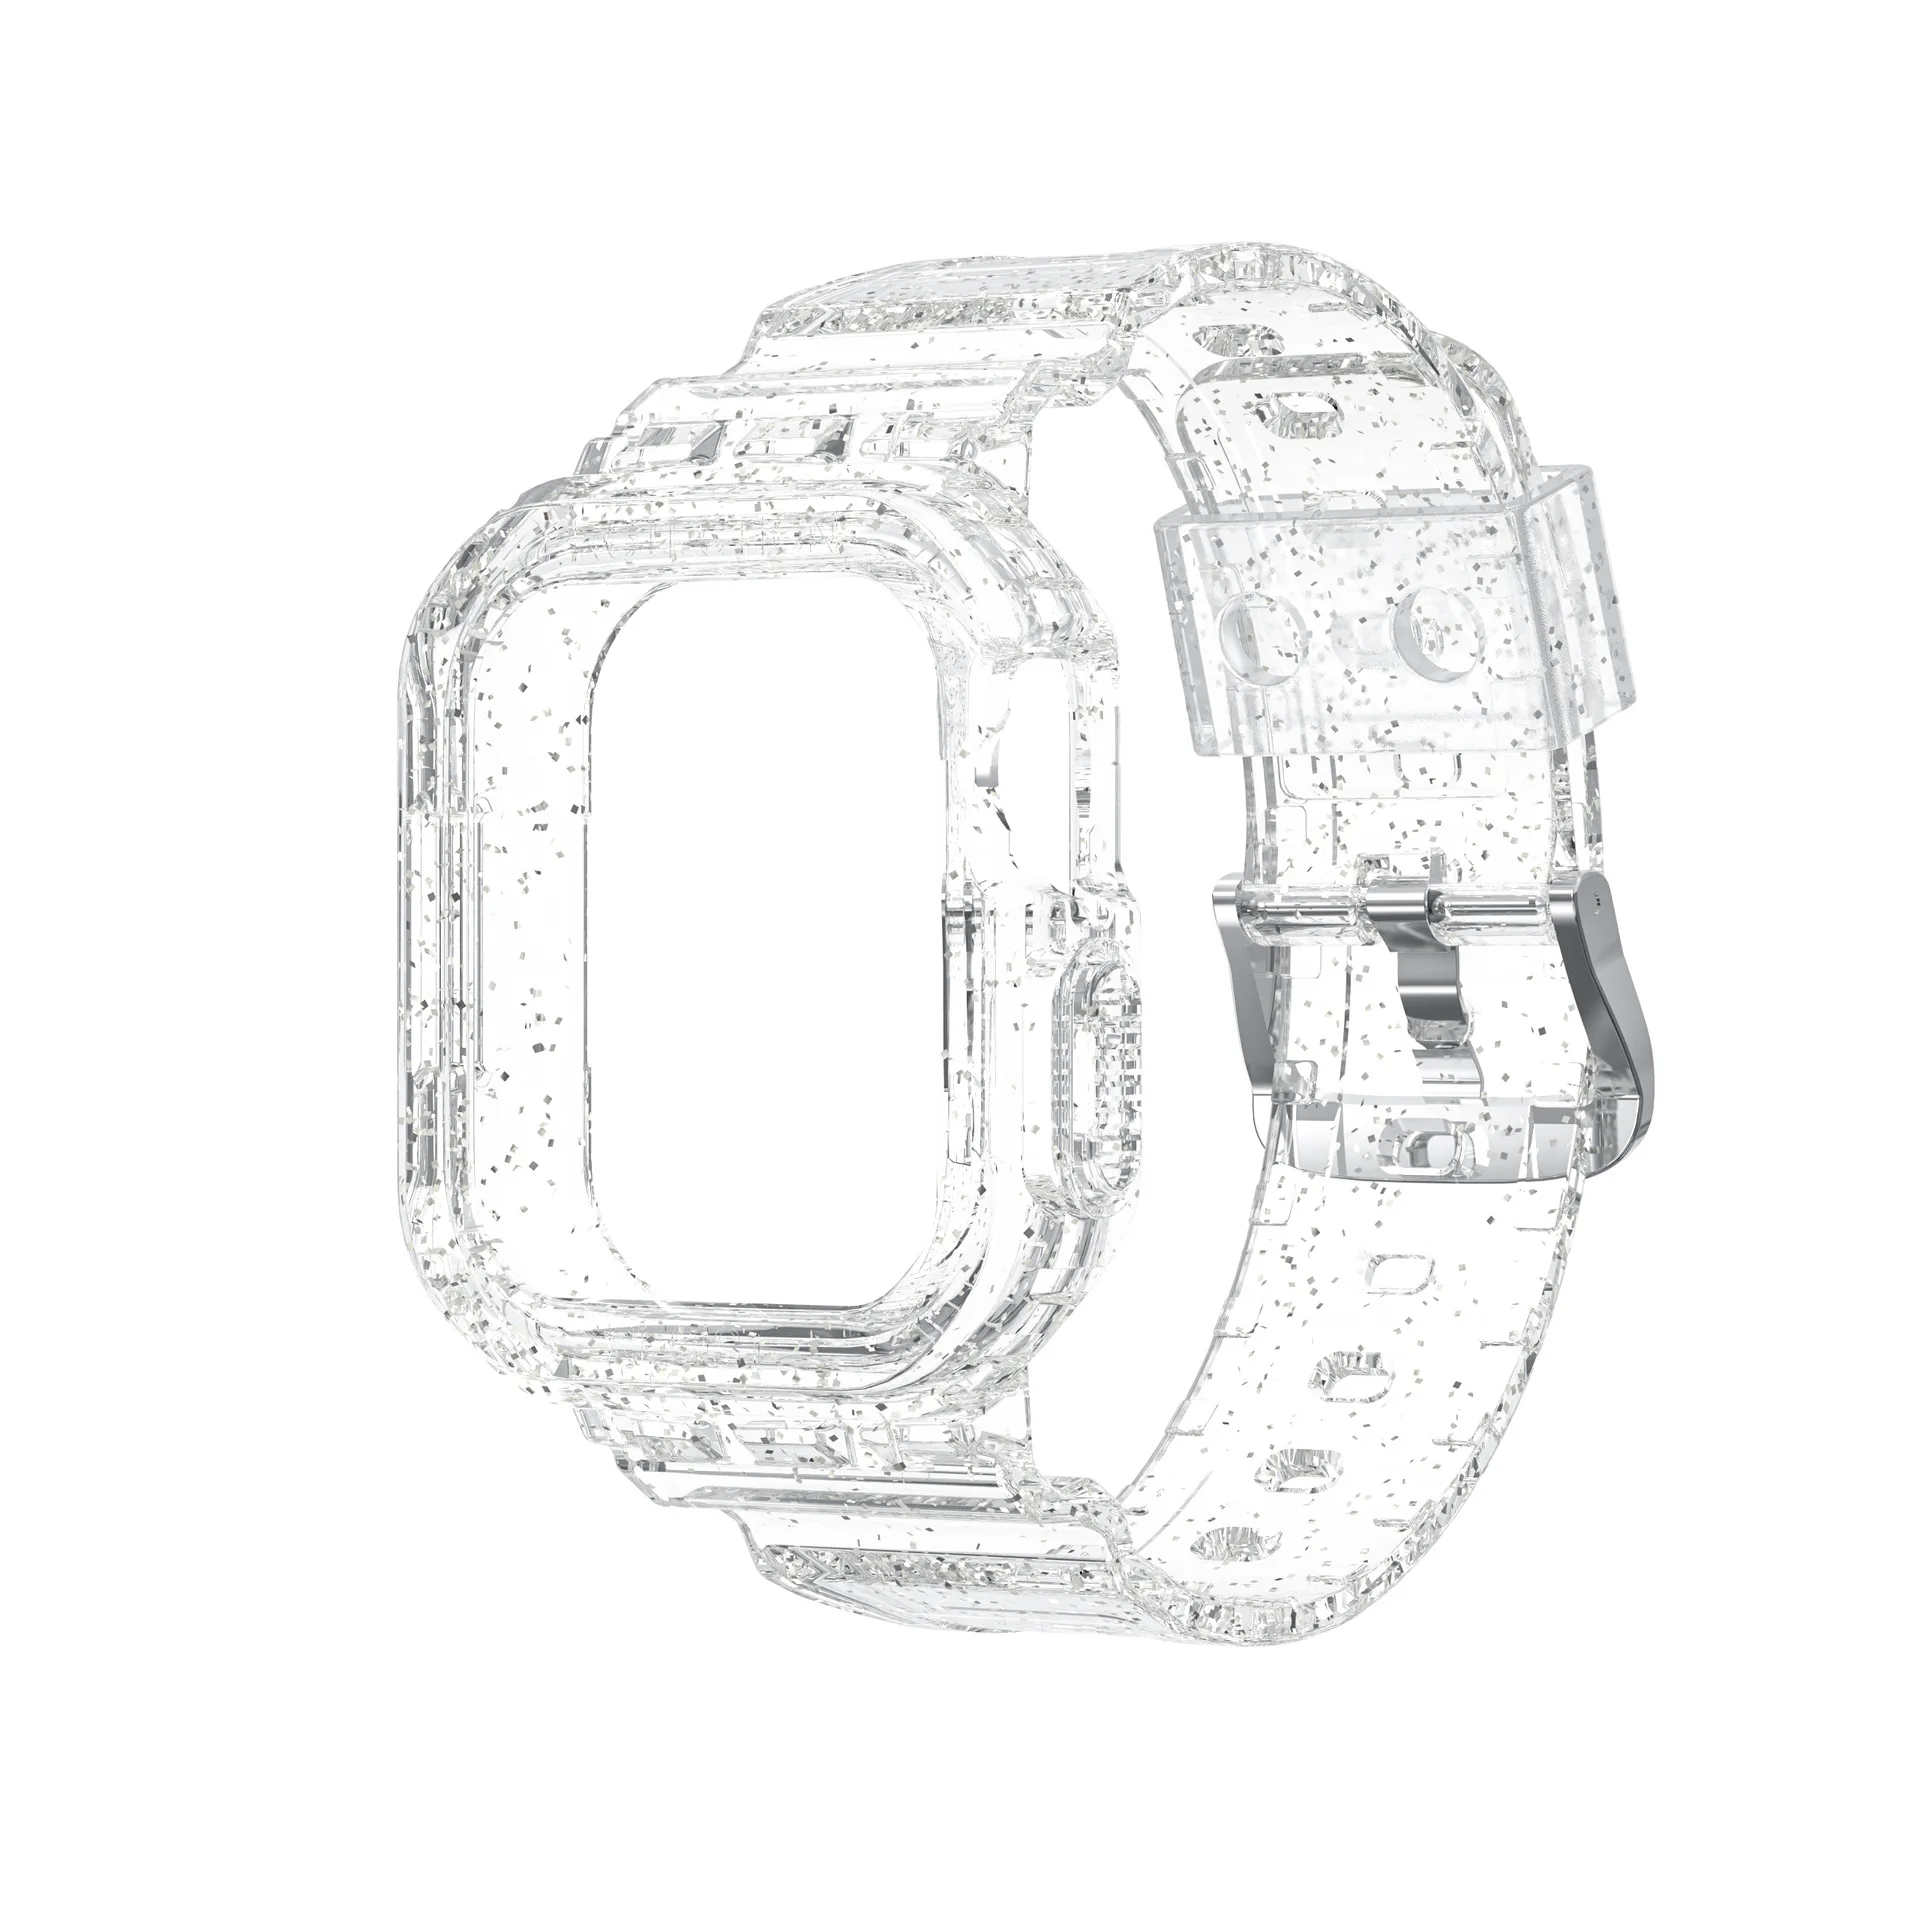 Apple watch strap tpu integrated strap enlarge